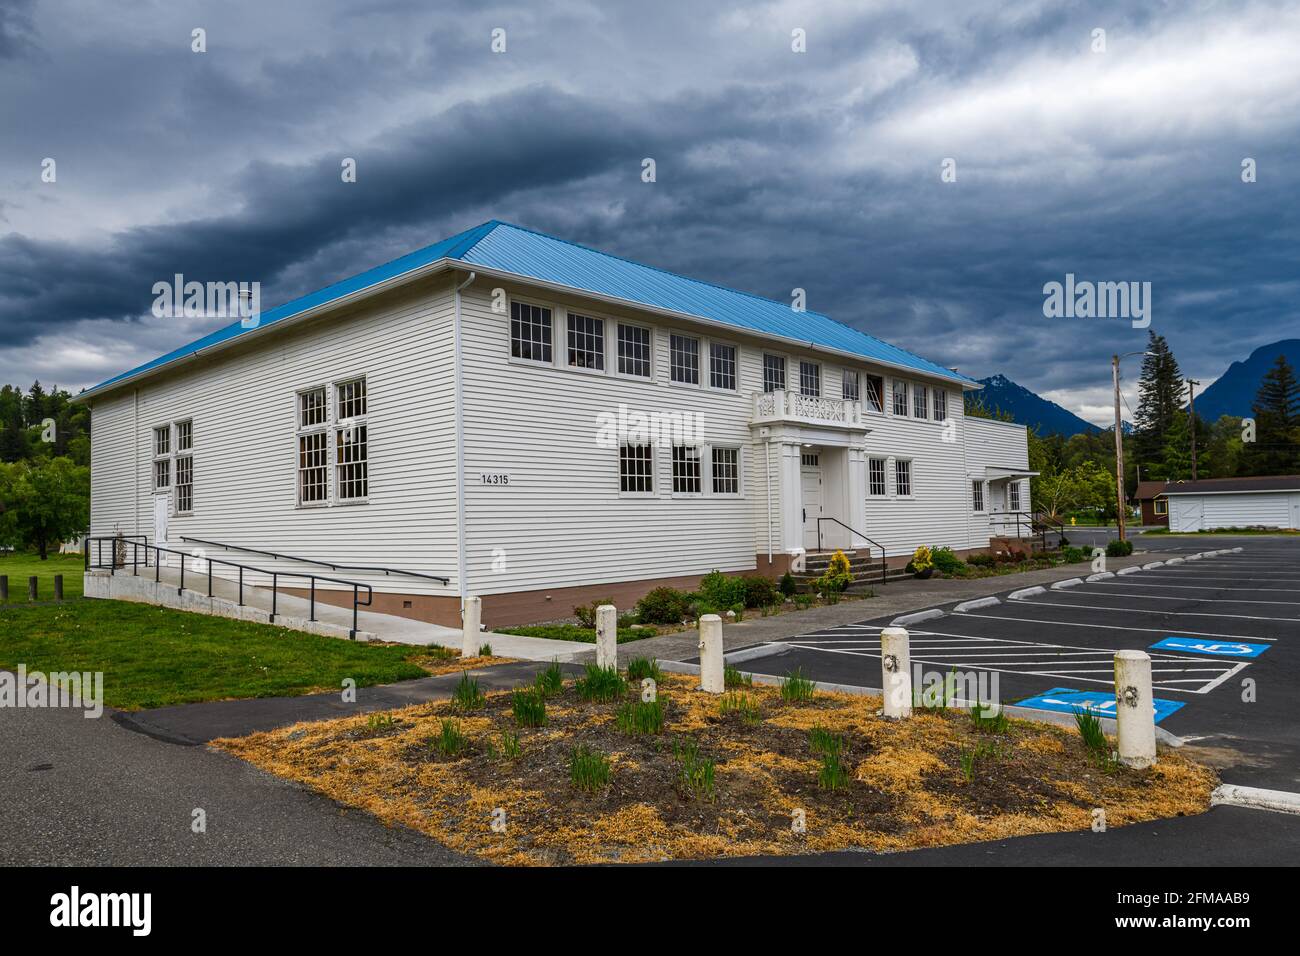 Startup, WA, USA - May 06, 2021; The Startup Event Center in the Cascade Foothills near Sultan with moody spring skies above the restored building. Stock Photo